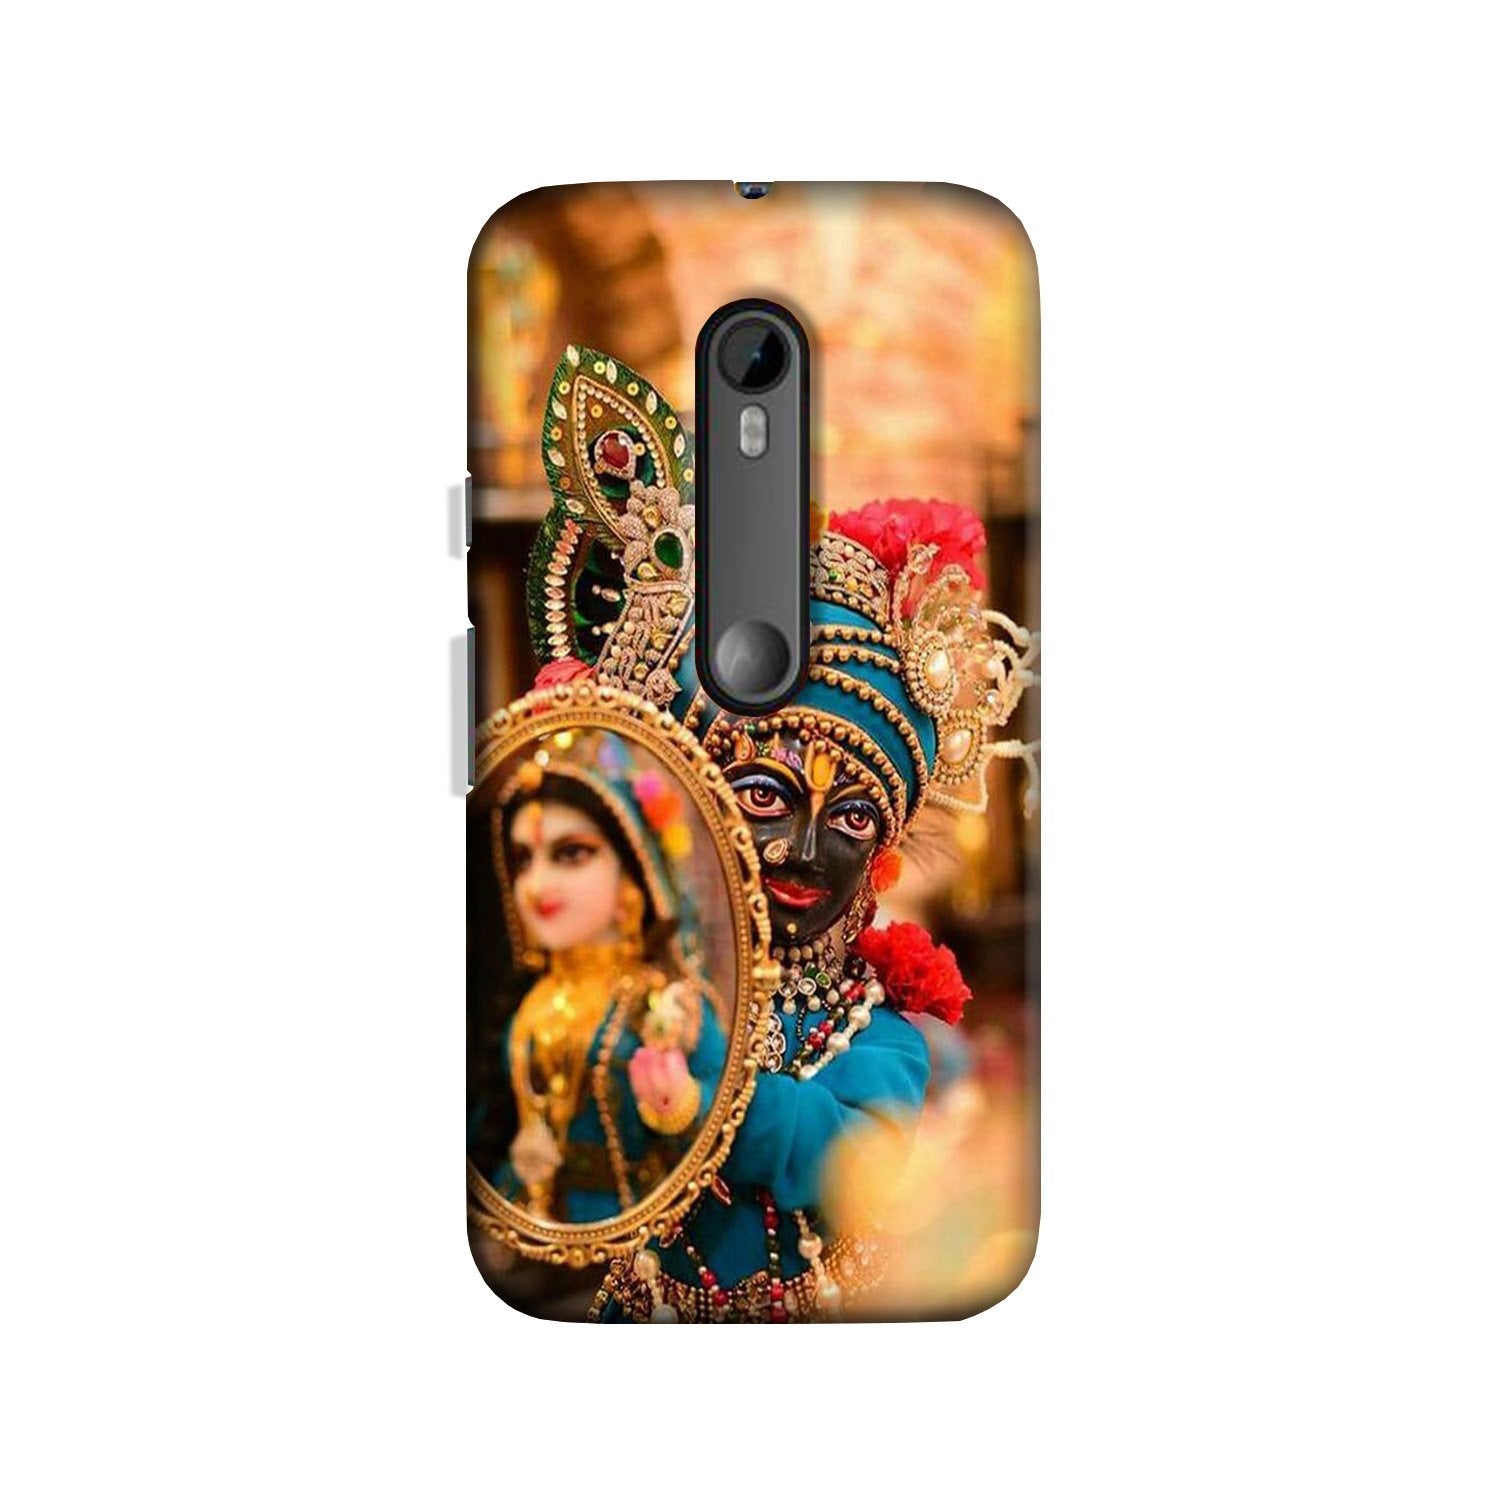 Lord Krishna5 Case for Moto X Force